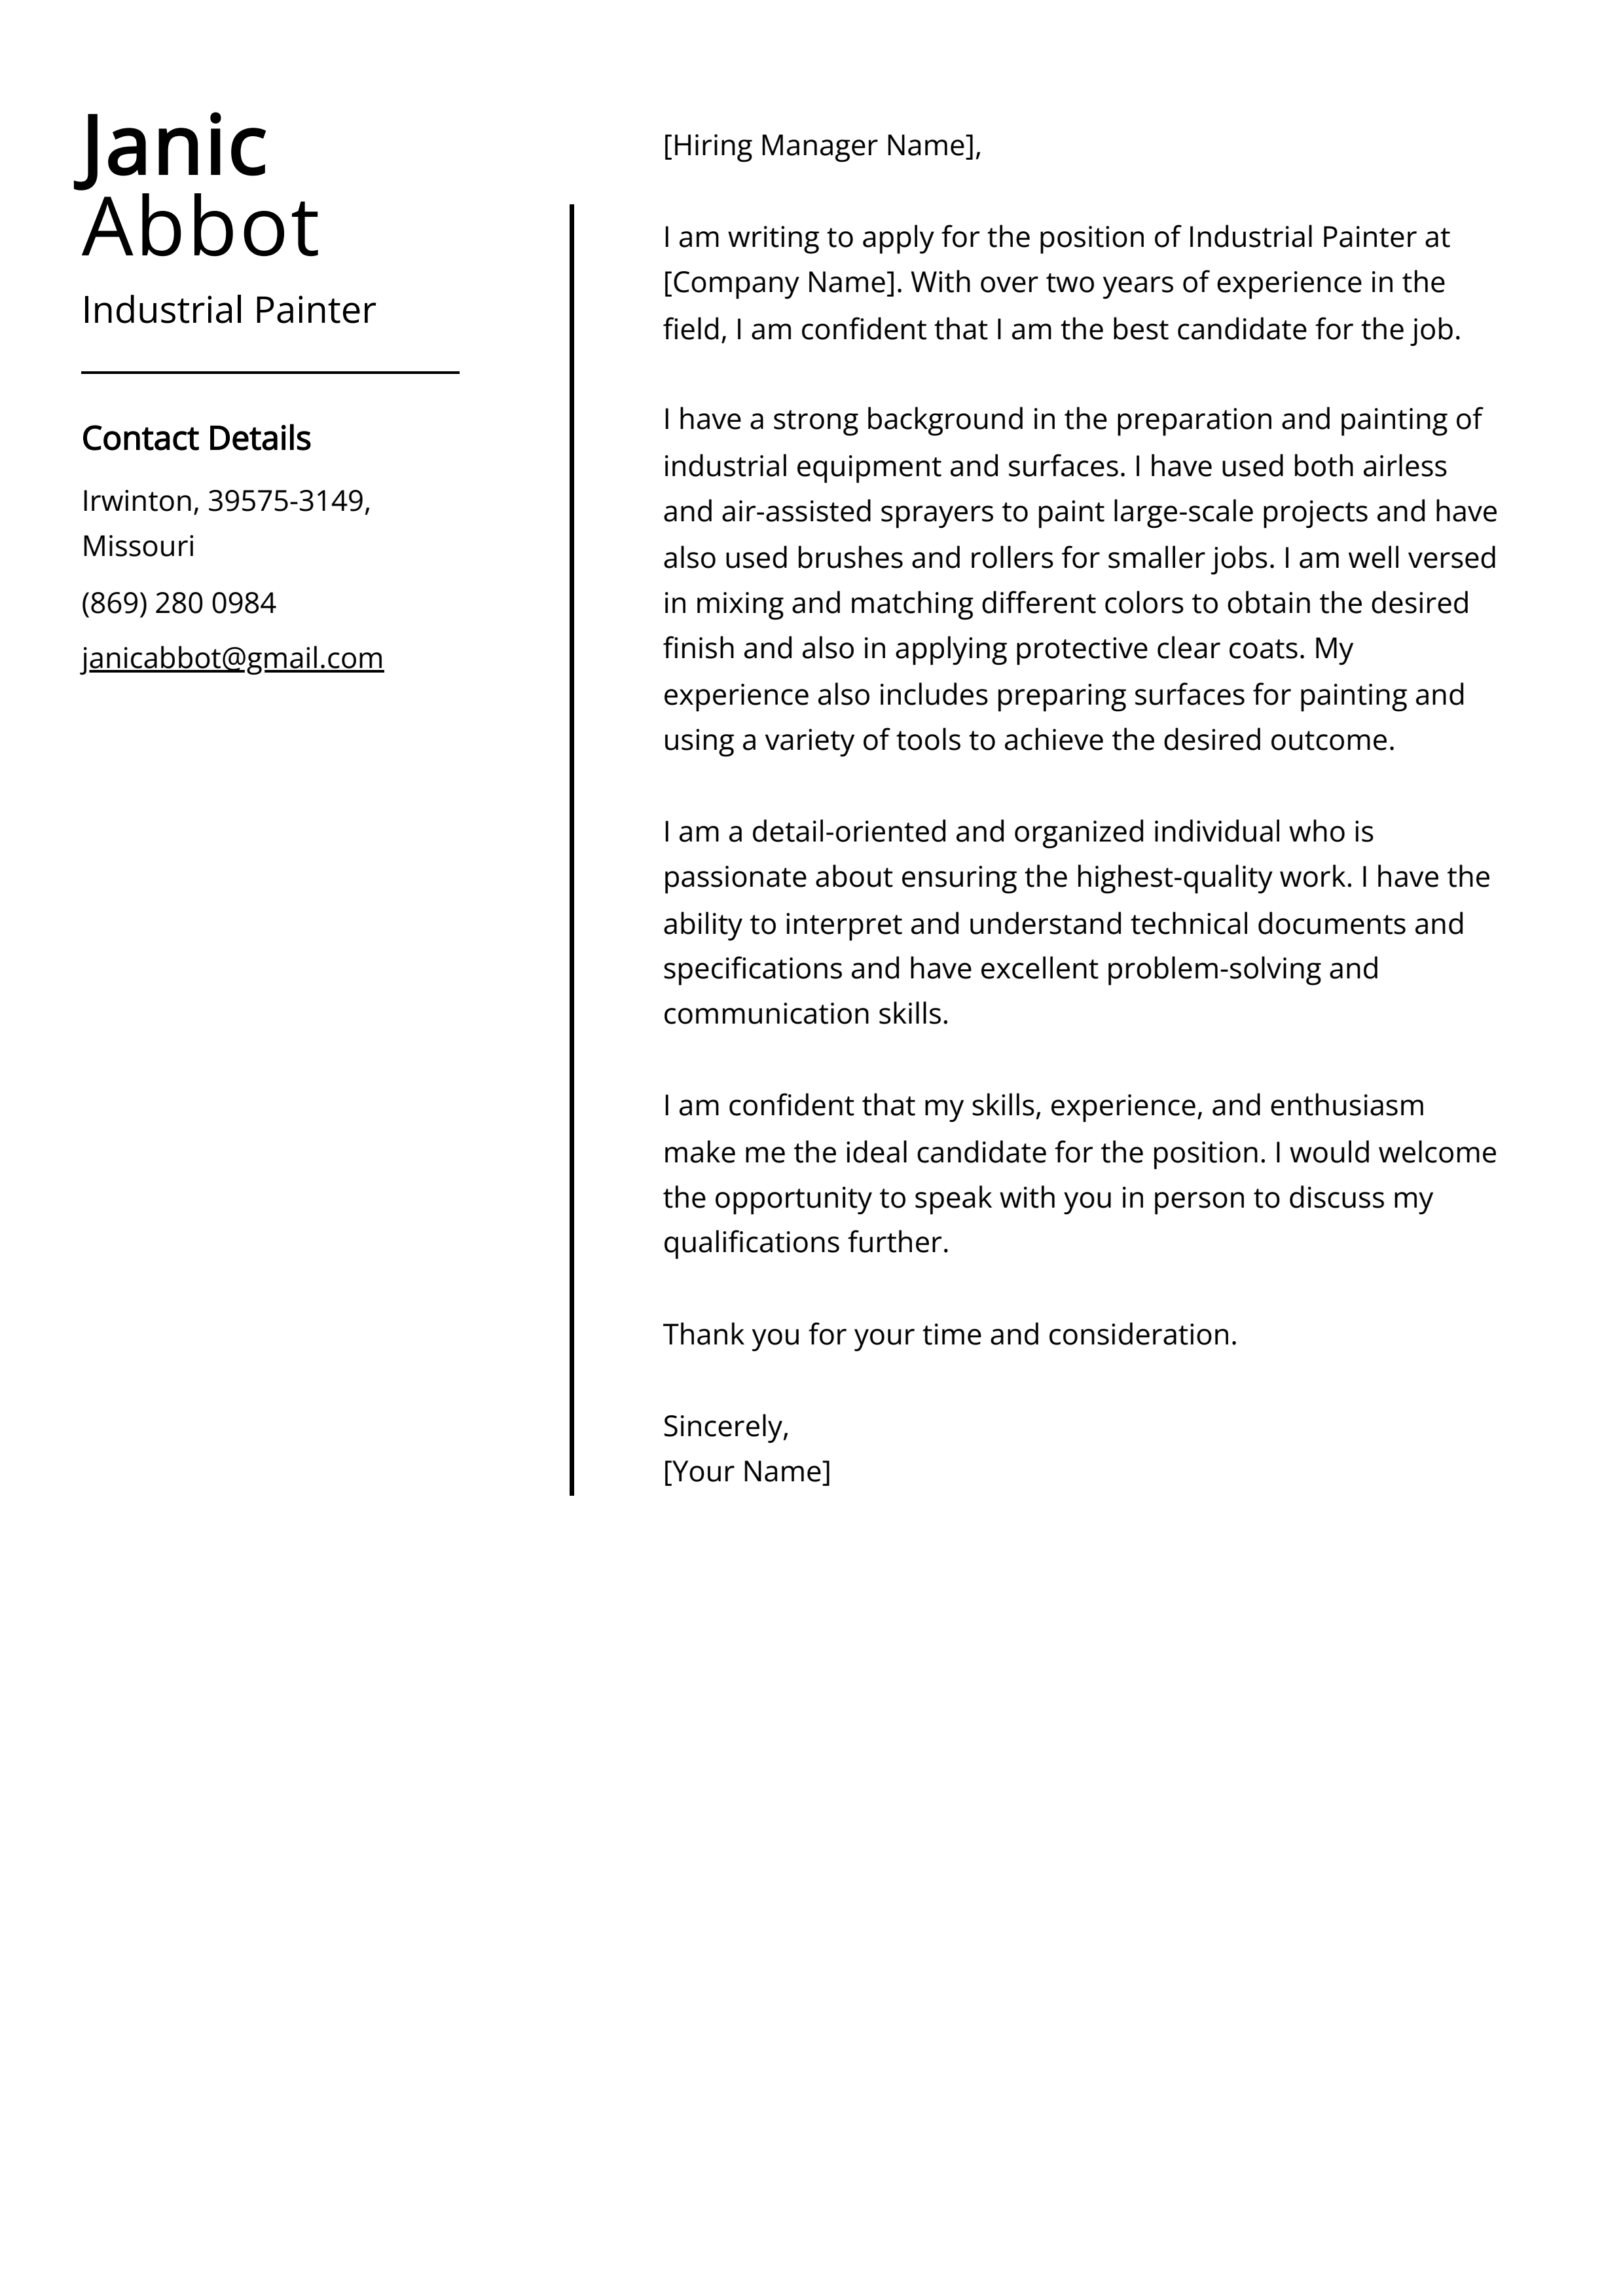 Industrial Painter Cover Letter Example